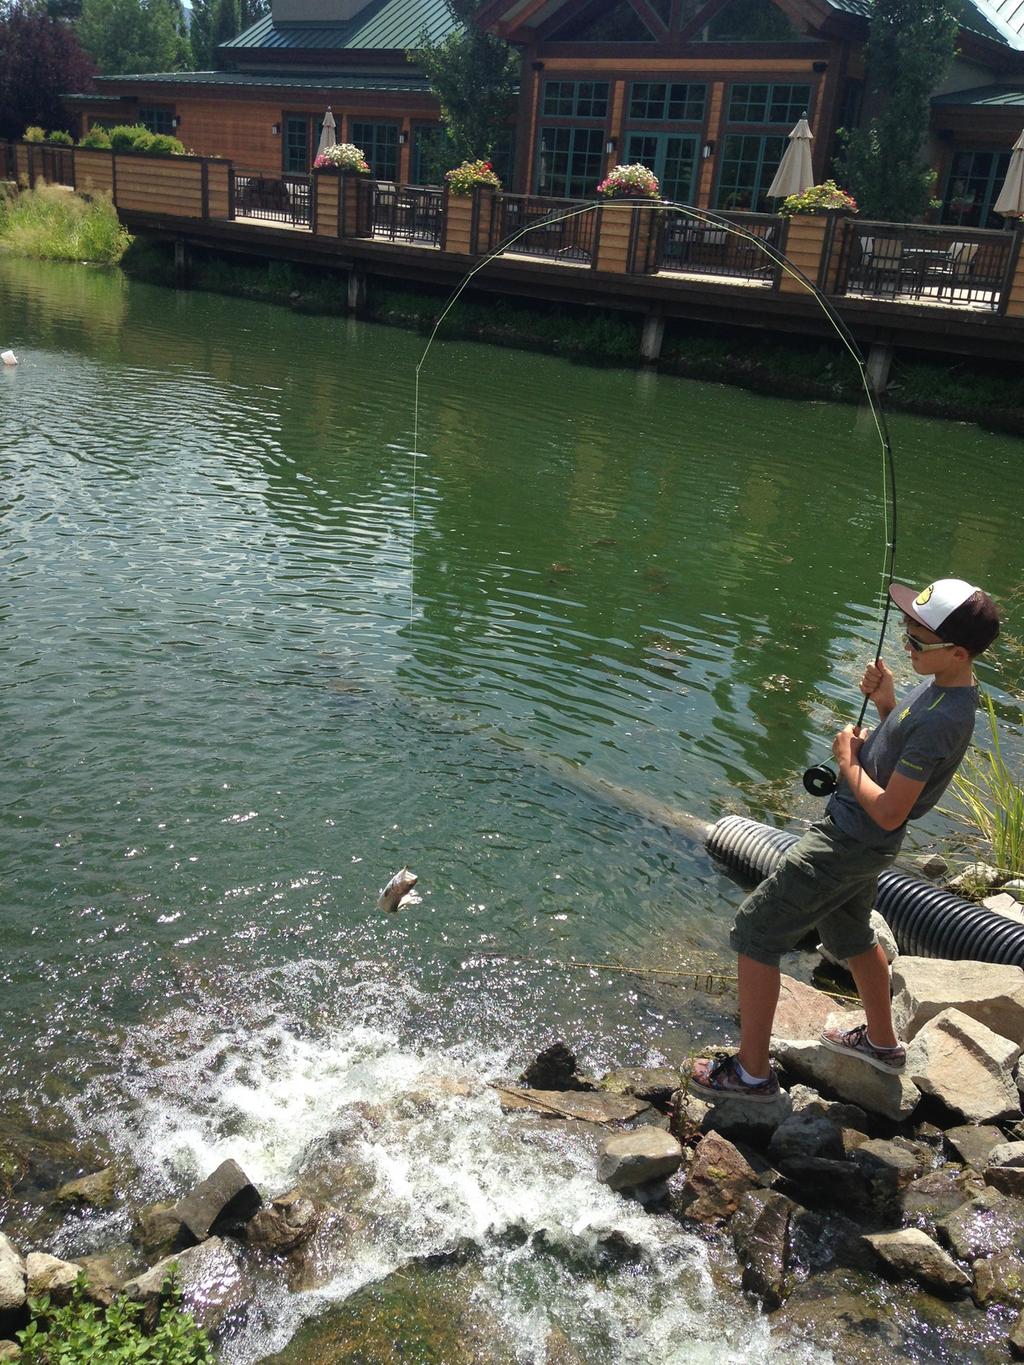 Try your luck at the 6th annual TROUT FISHING DERBY Always a great way to start the